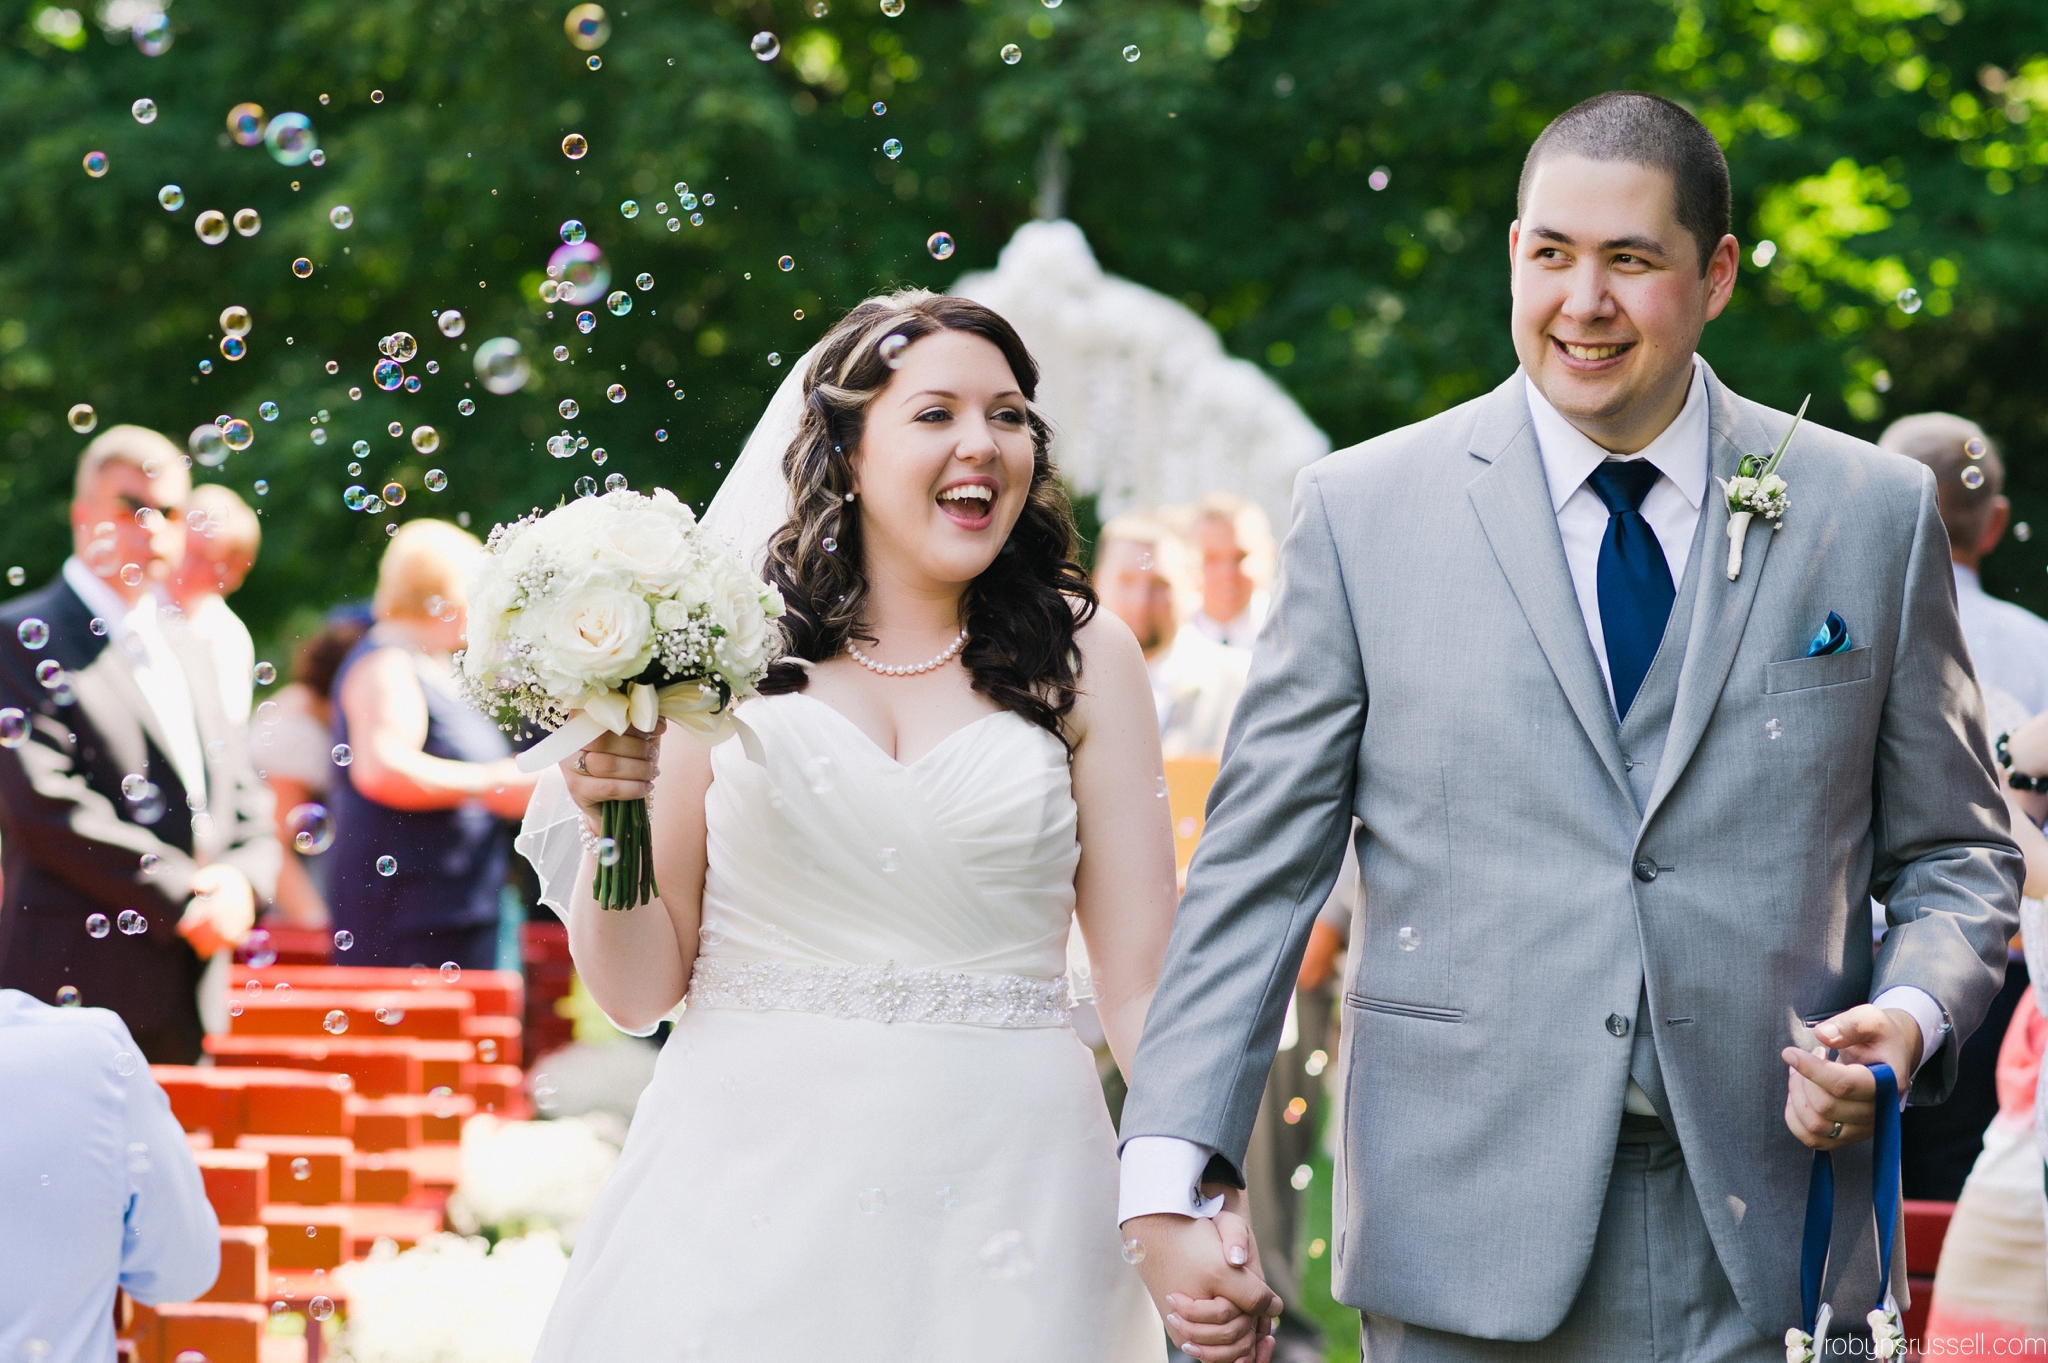 24-bride-and-groom-walk-to-bubbles-down-aisle.jpg